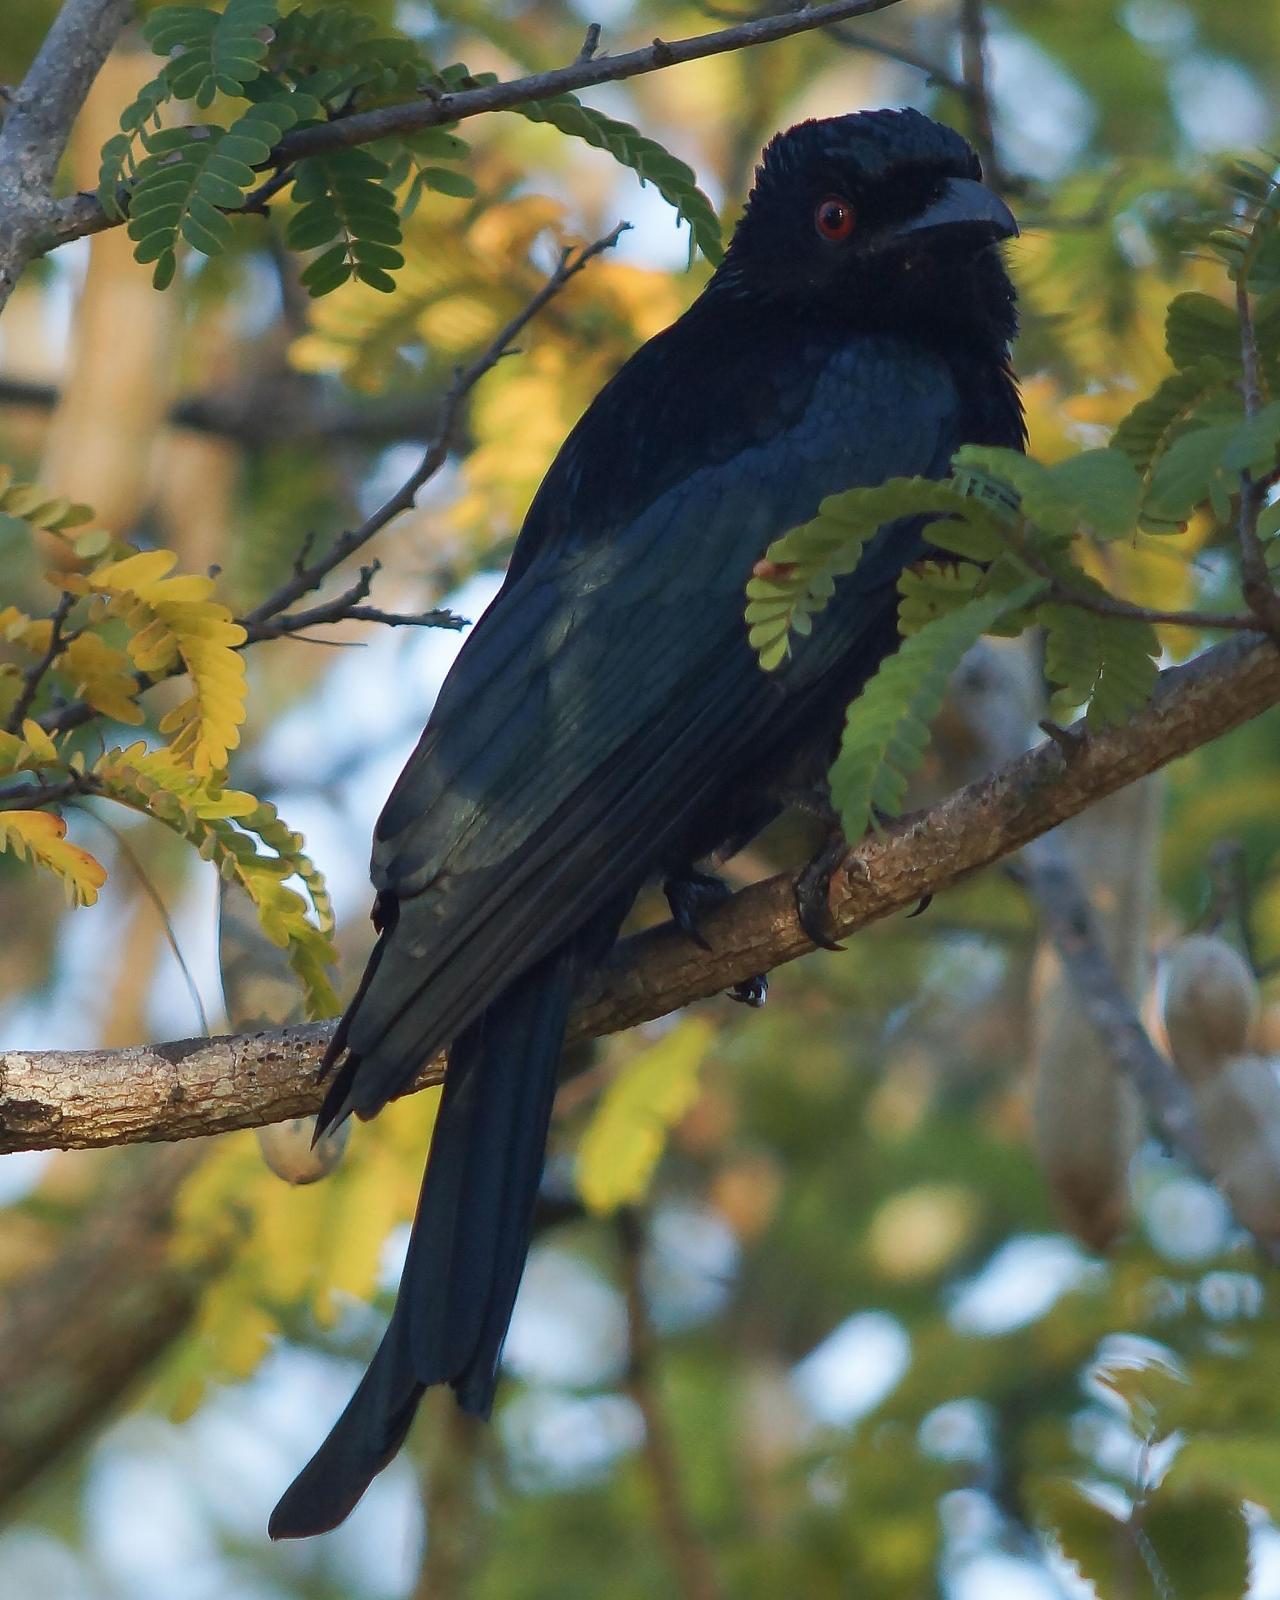 Spangled Drongo Photo by Steve Percival